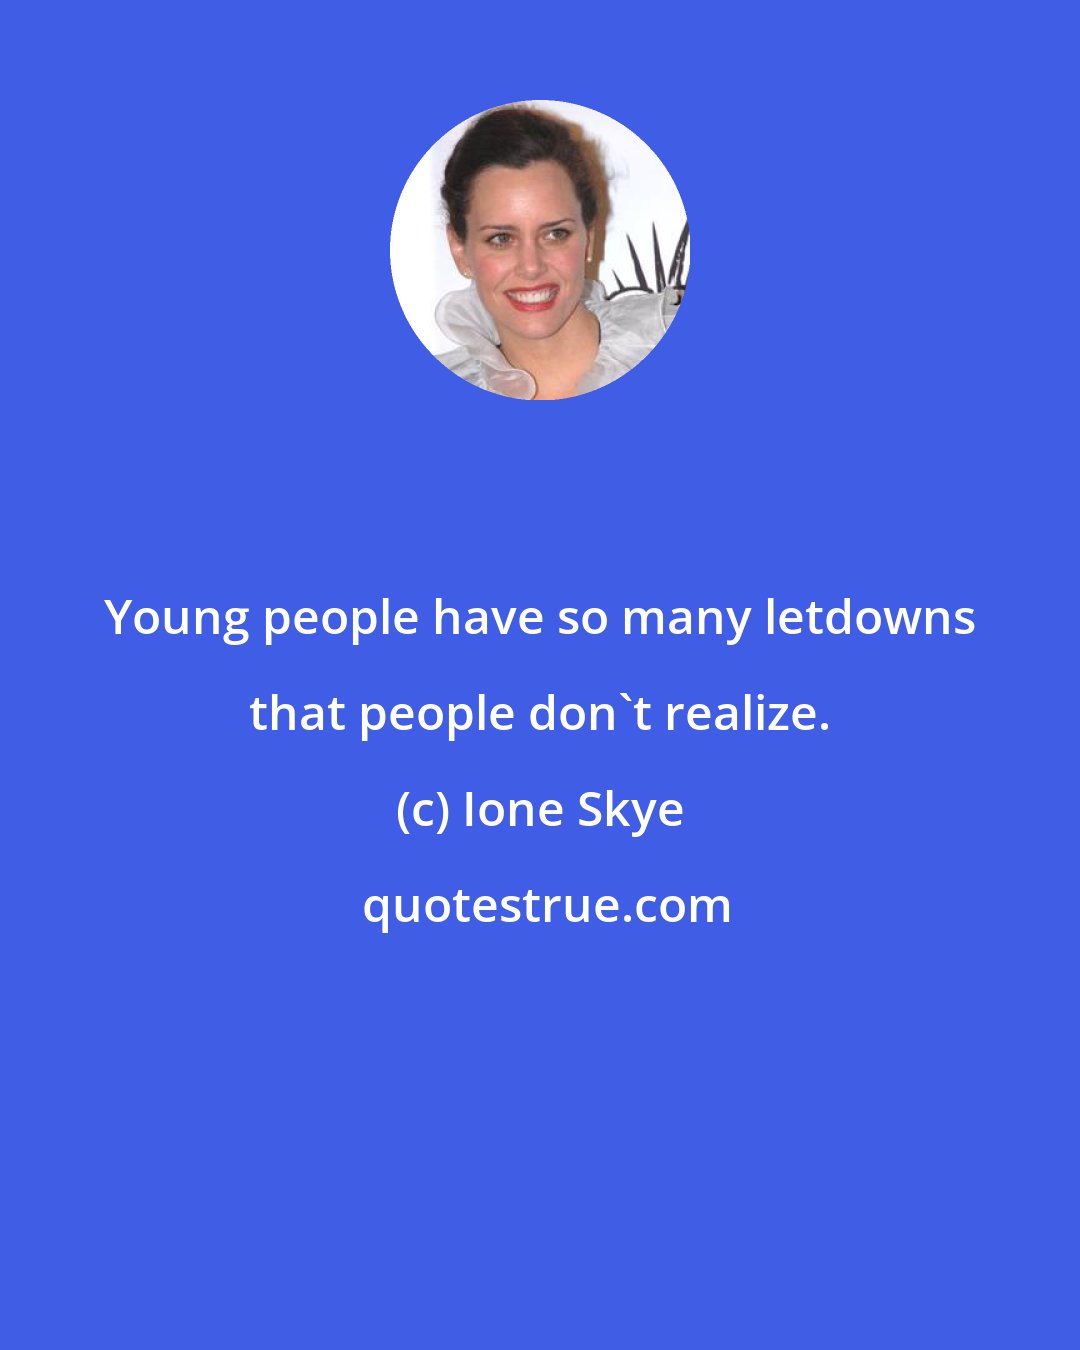 Ione Skye: Young people have so many letdowns that people don't realize.